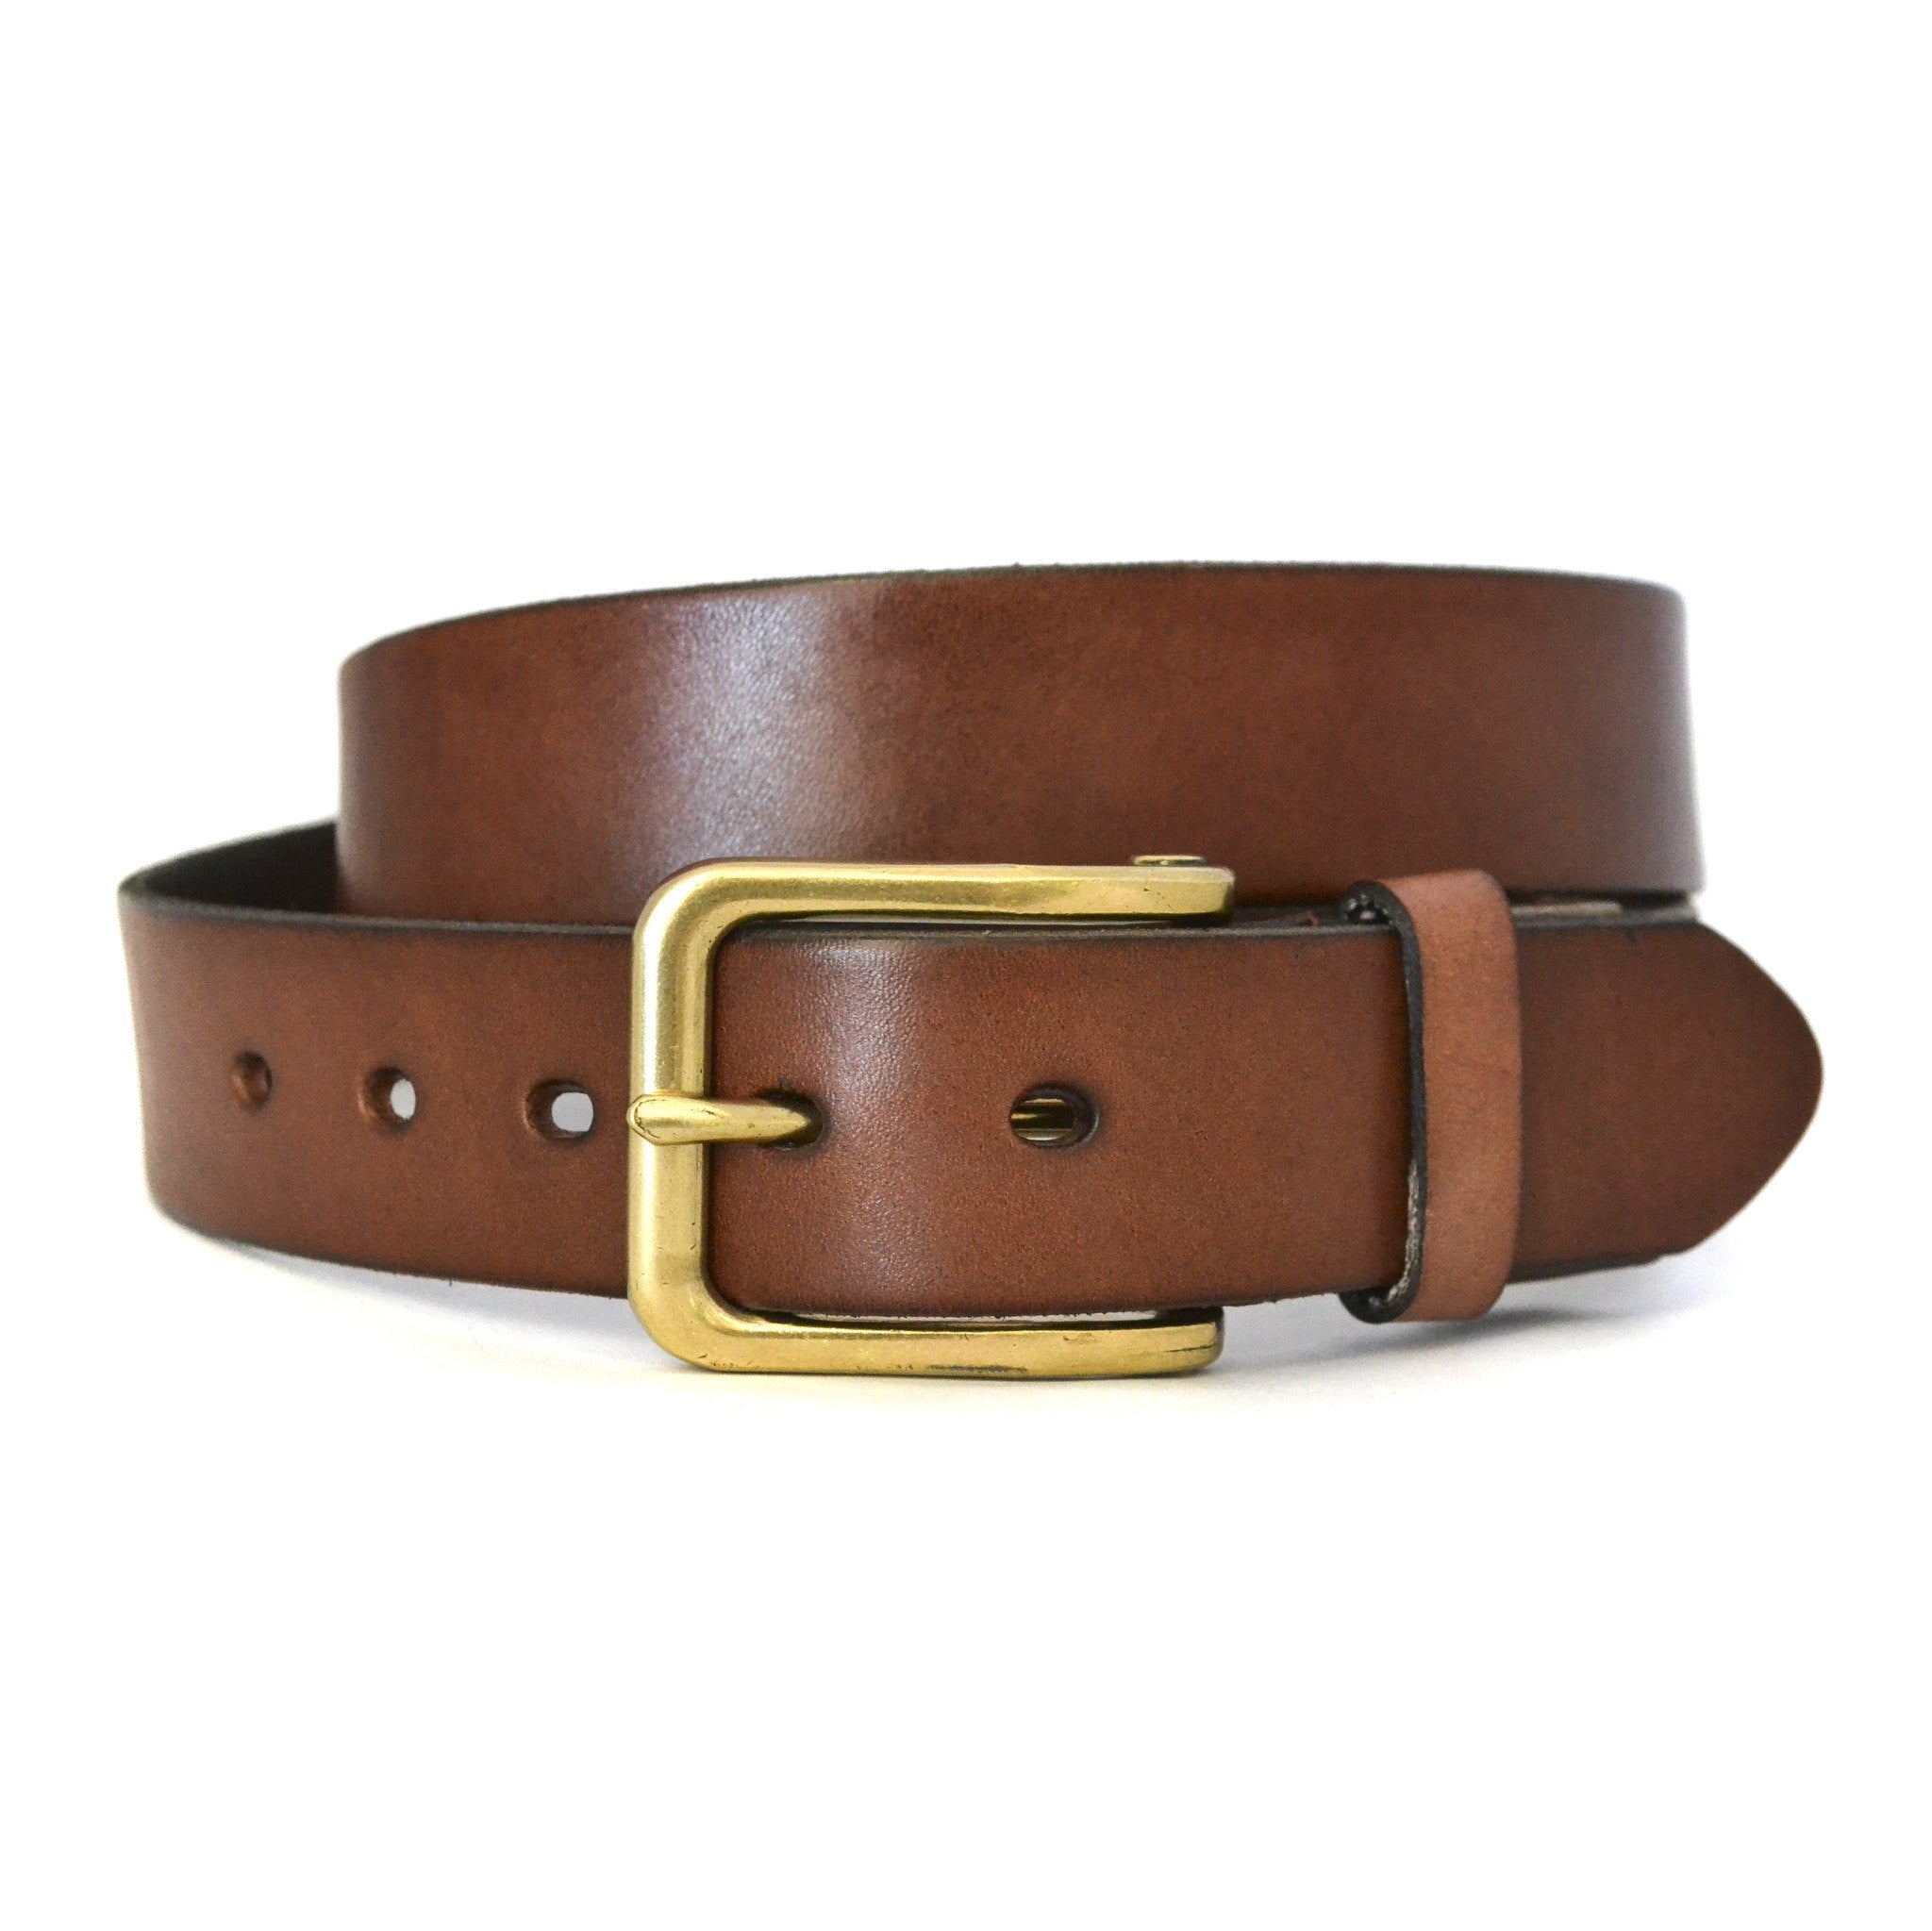 FLORIDA - Mens Tan Genuine Leather Belt with Antique Gold Buckle – BeltNBags